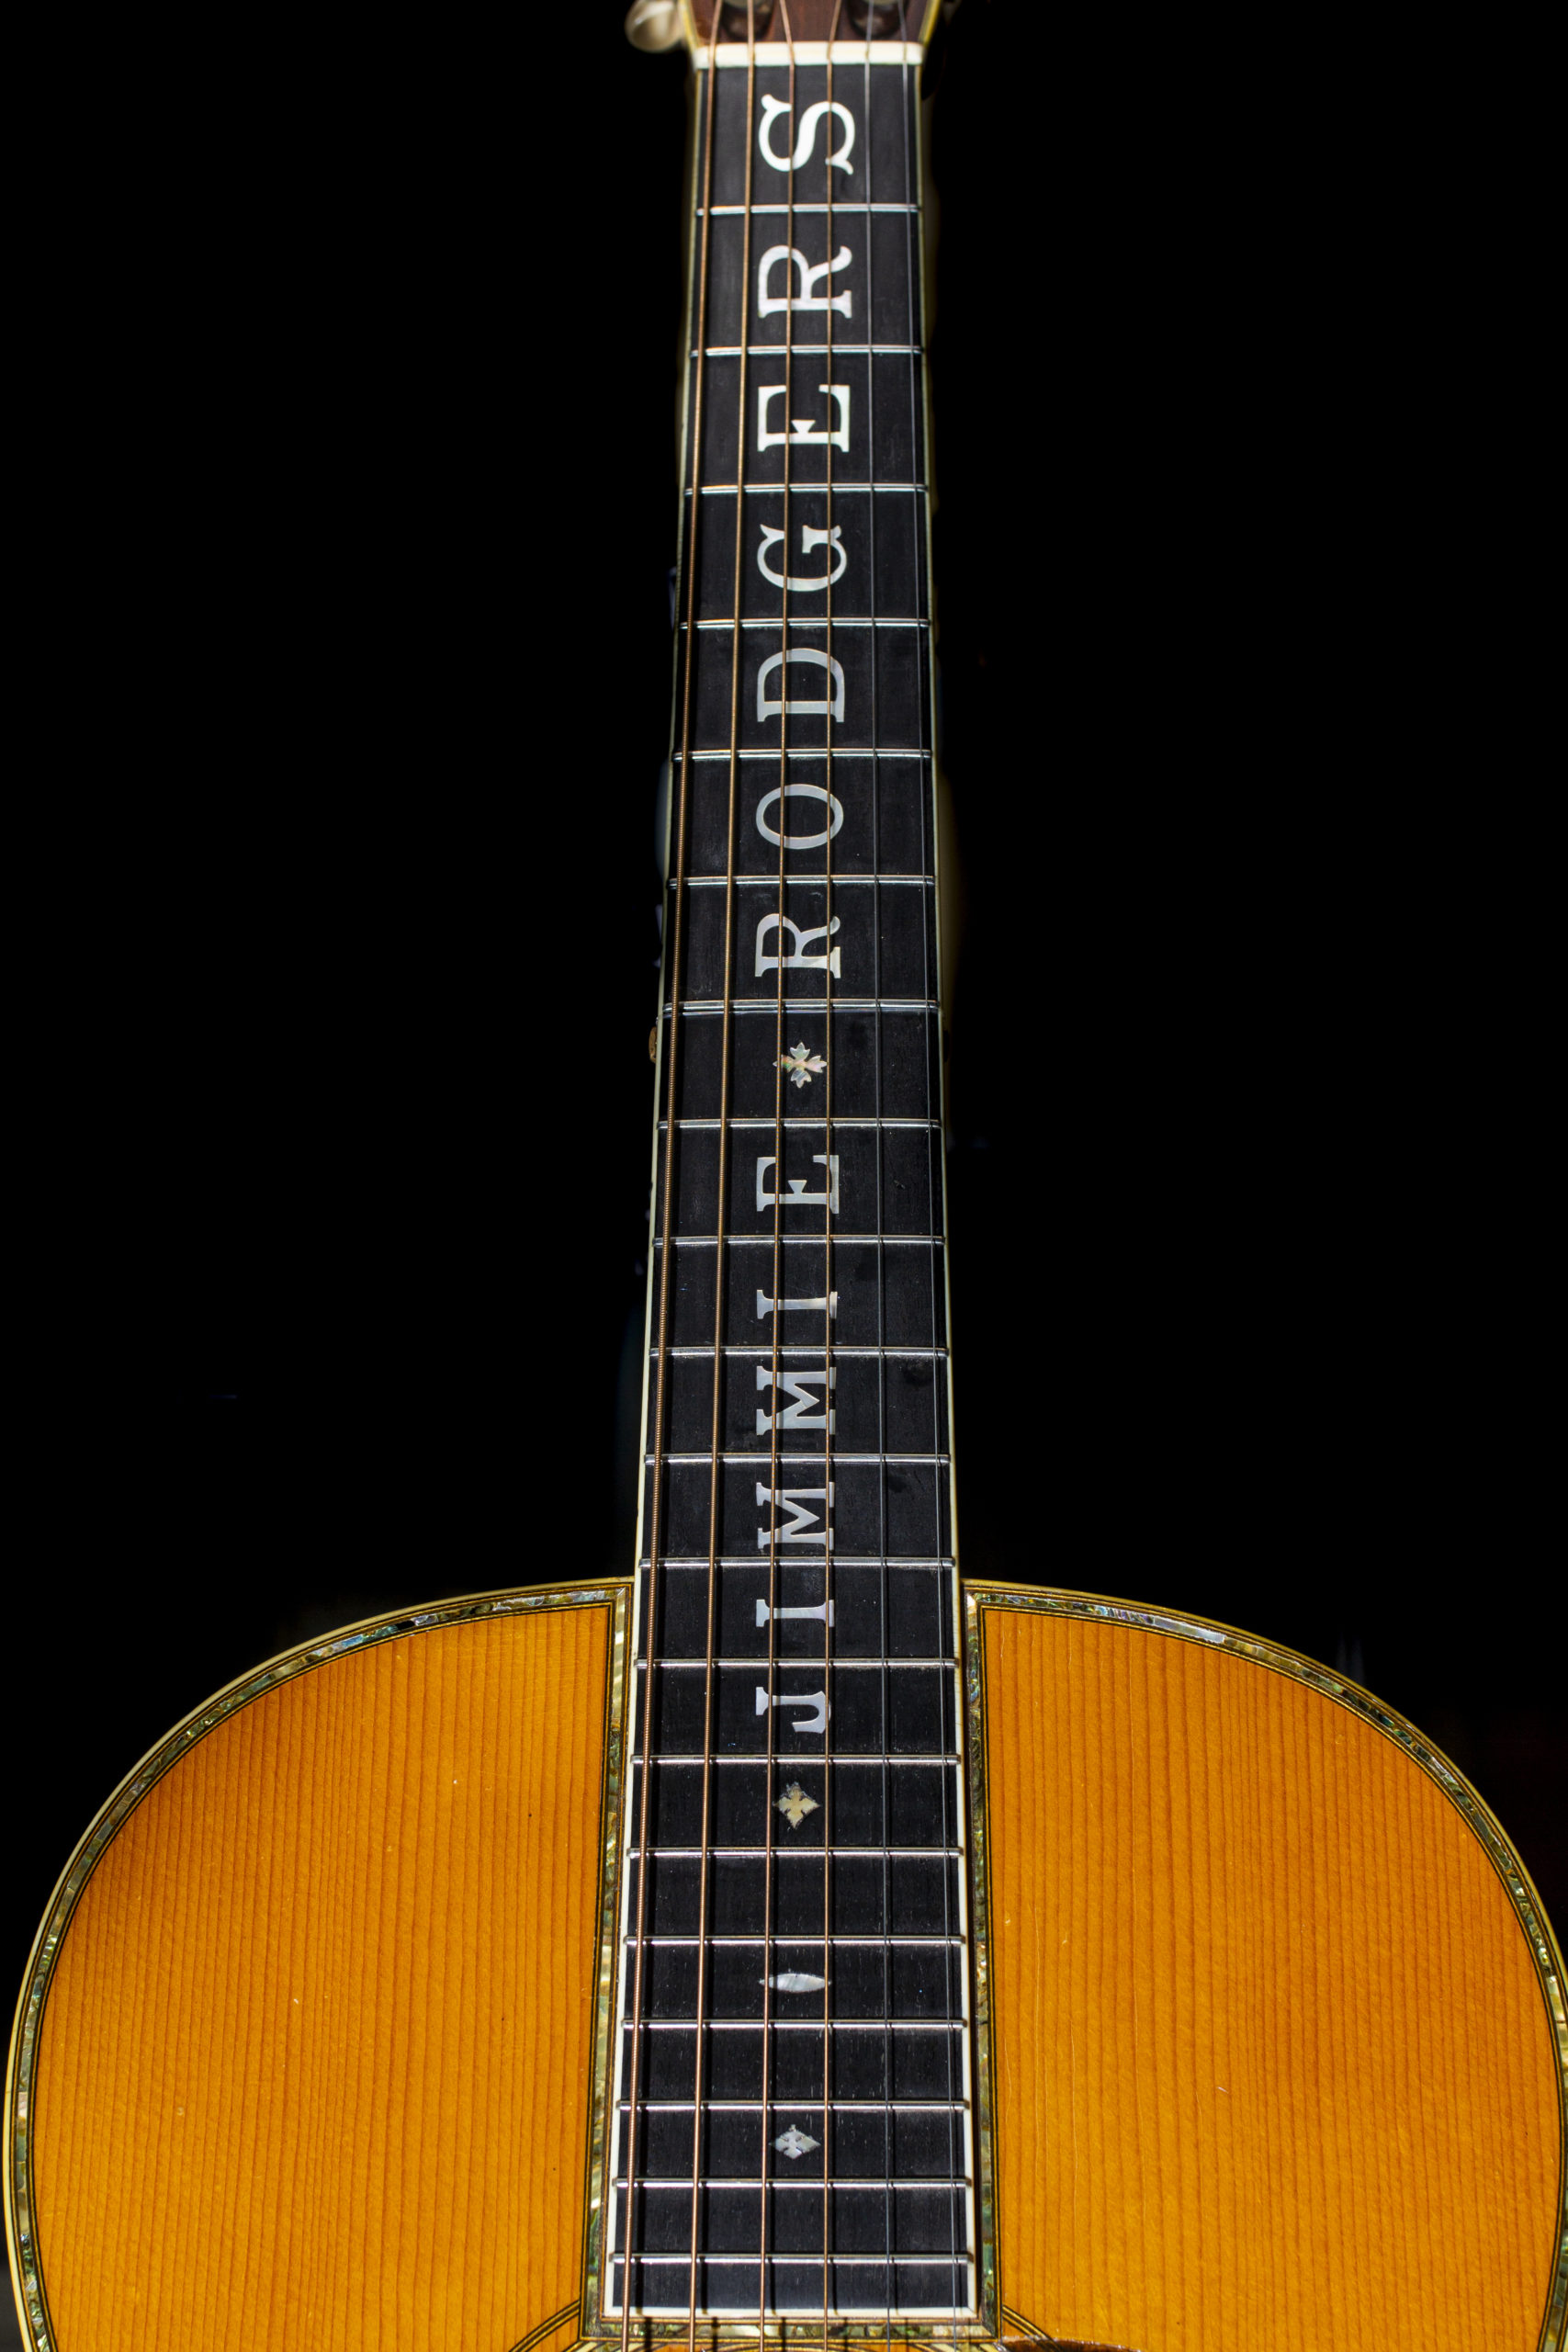 The neck of Jimmie Rodgers "Blue Yodel" guitar depicting the artist's name in pearl inlay across the bridge